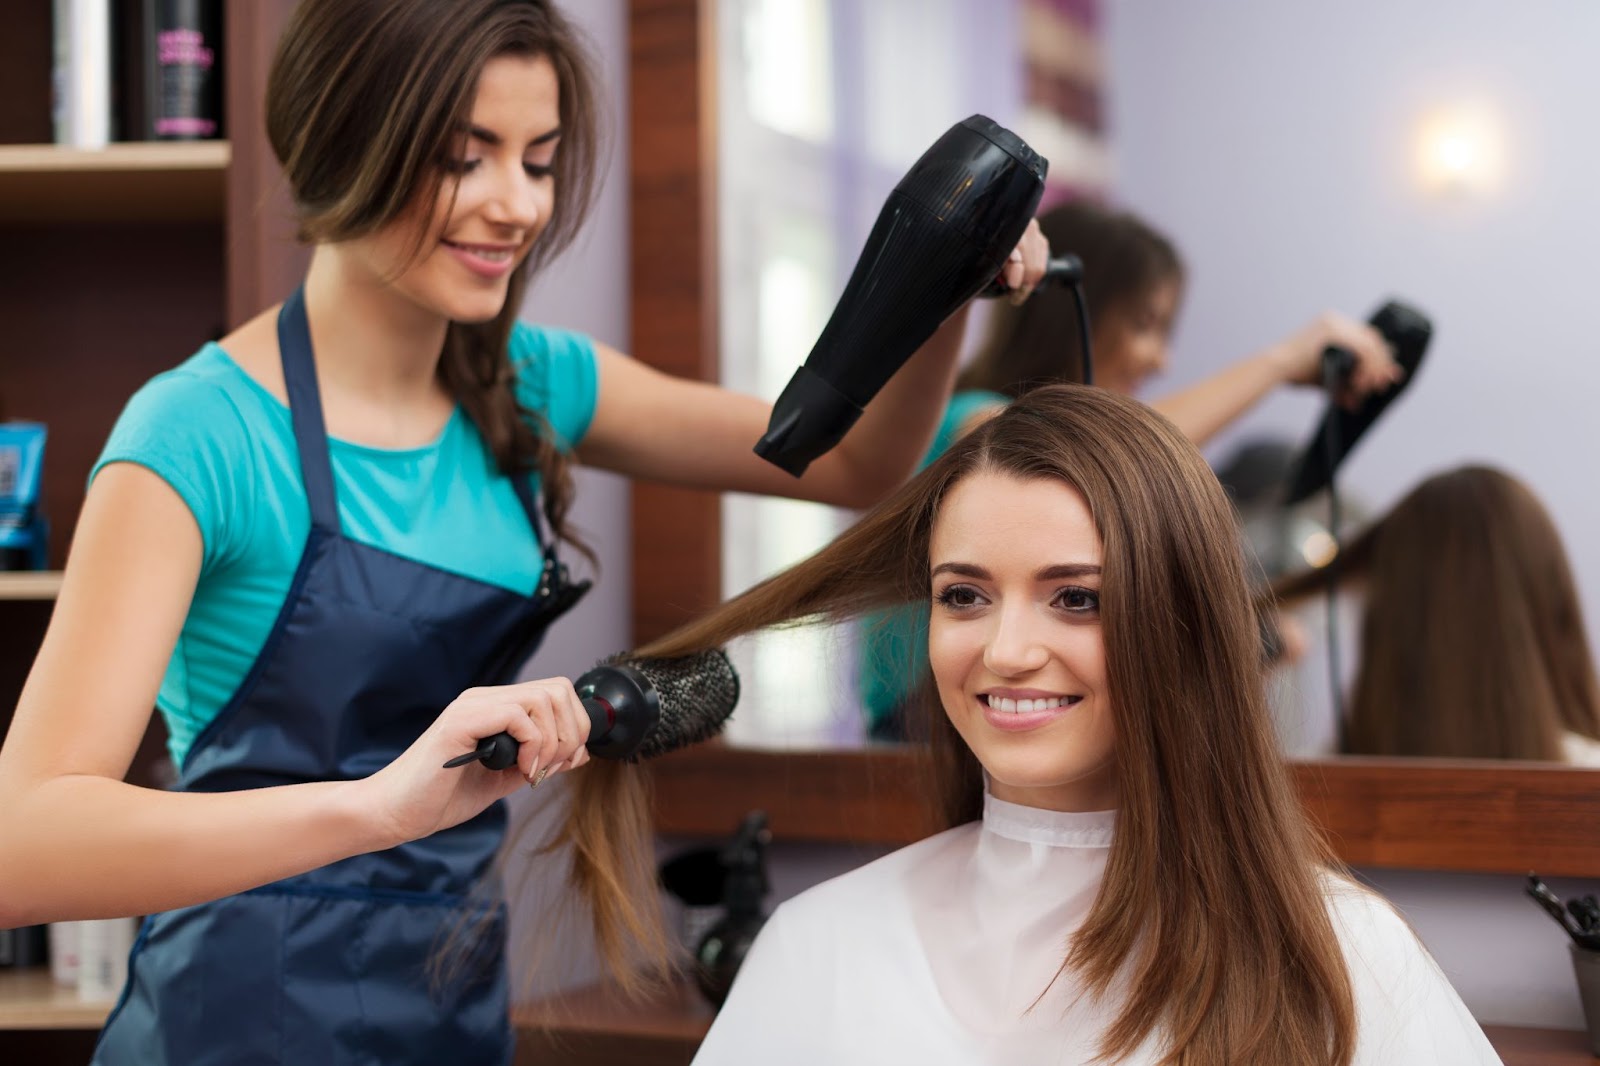 Top Chain Hair Salons in the US